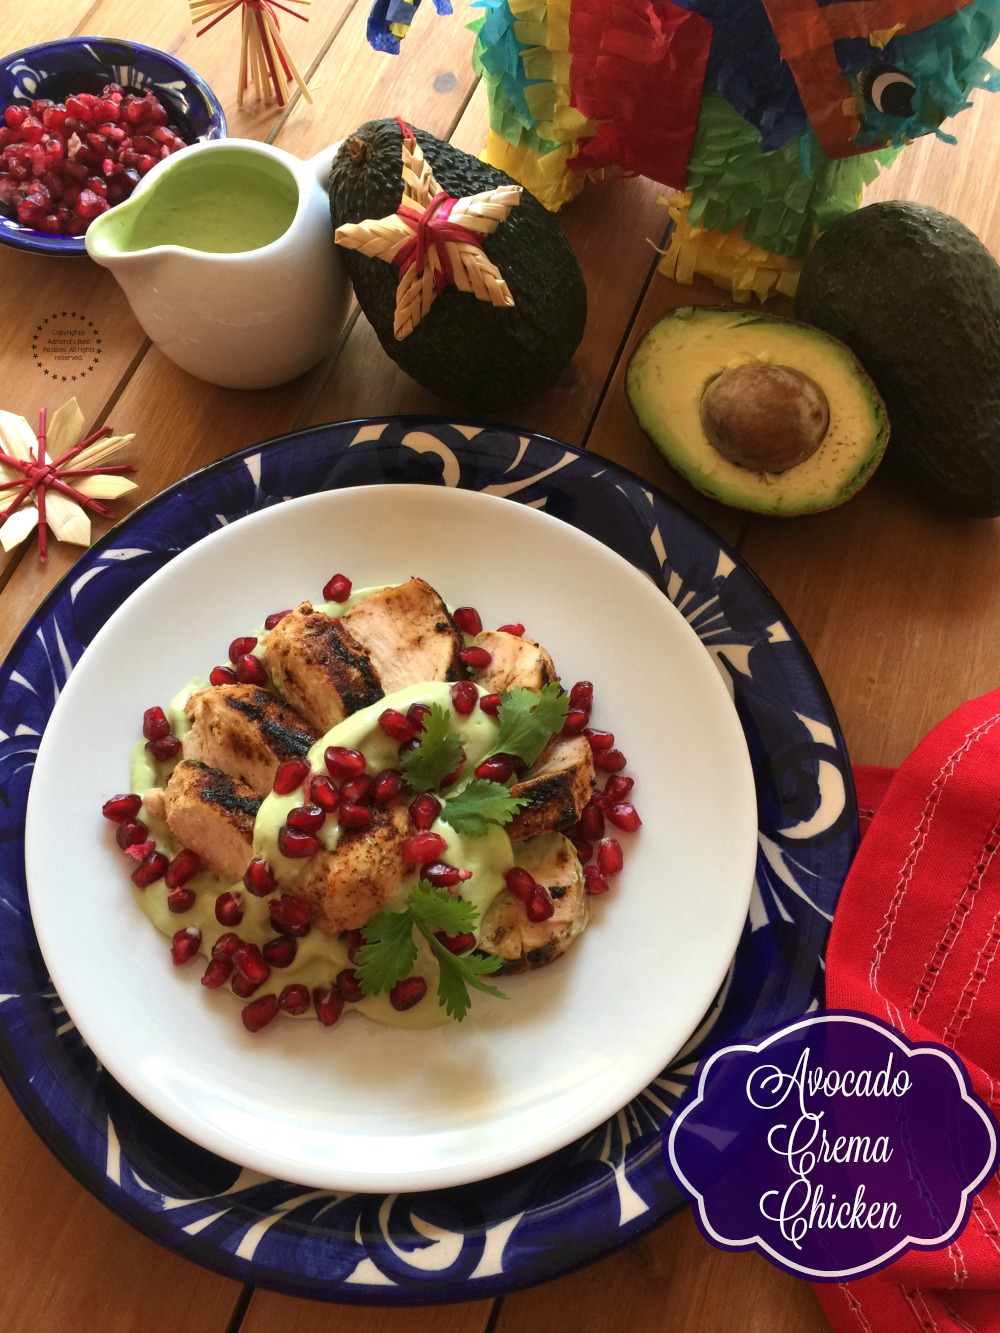 Avocado Crema Chicken with Pomegranate Jewels for our upcoming posada party